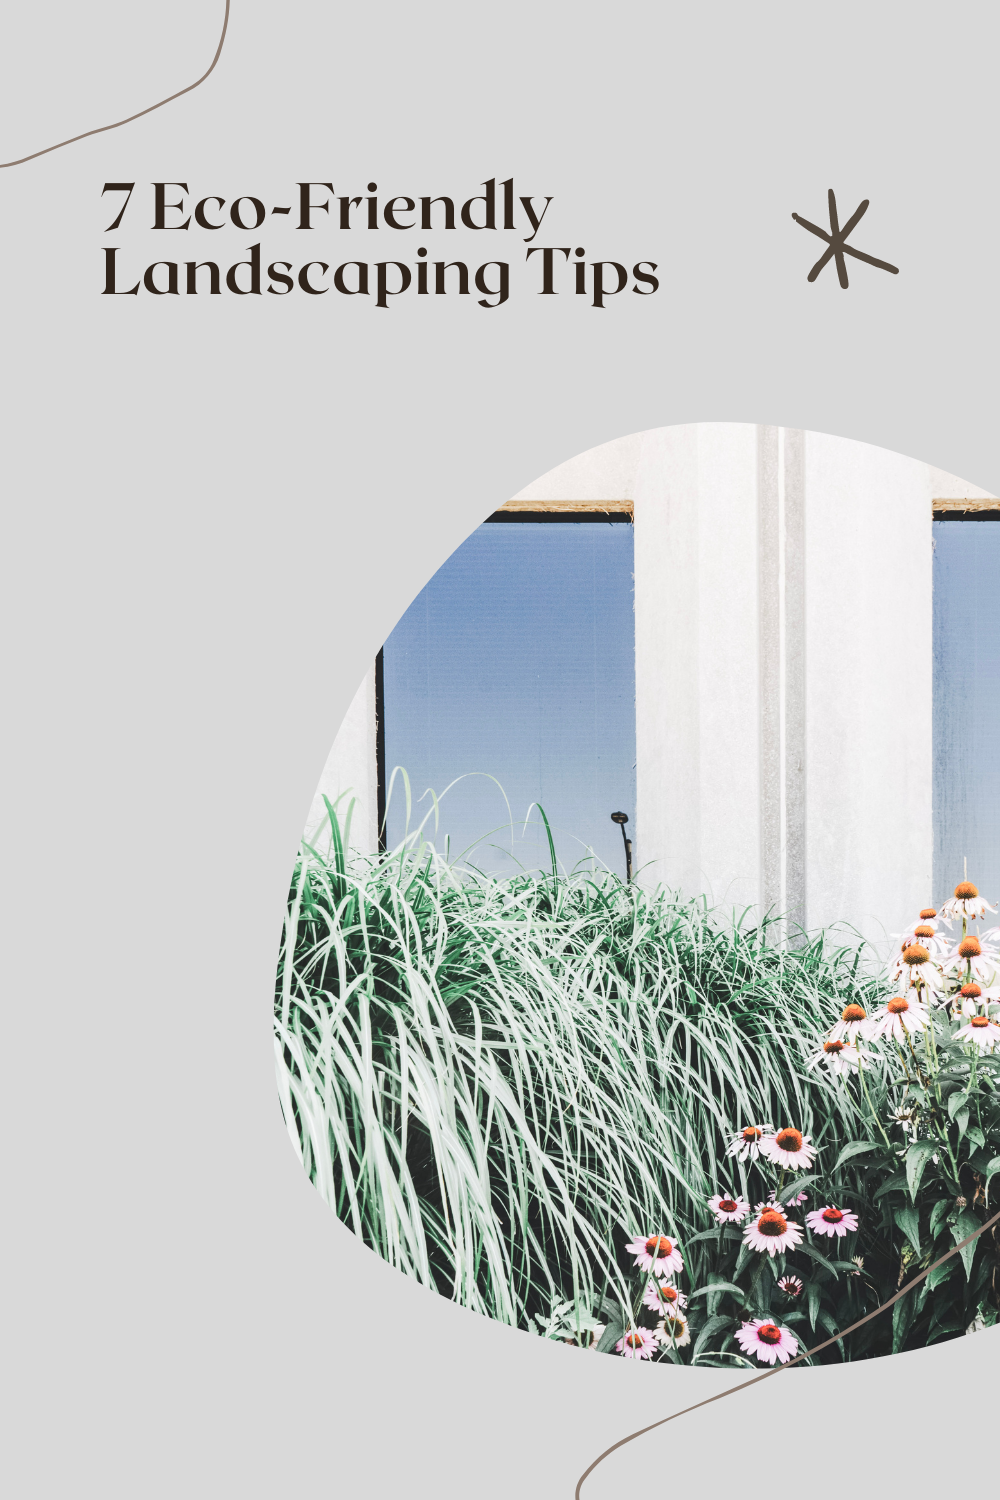 Landscaping with flowers and bushes in front of a home. This article covers 7 eco-friendly landscaping tips.